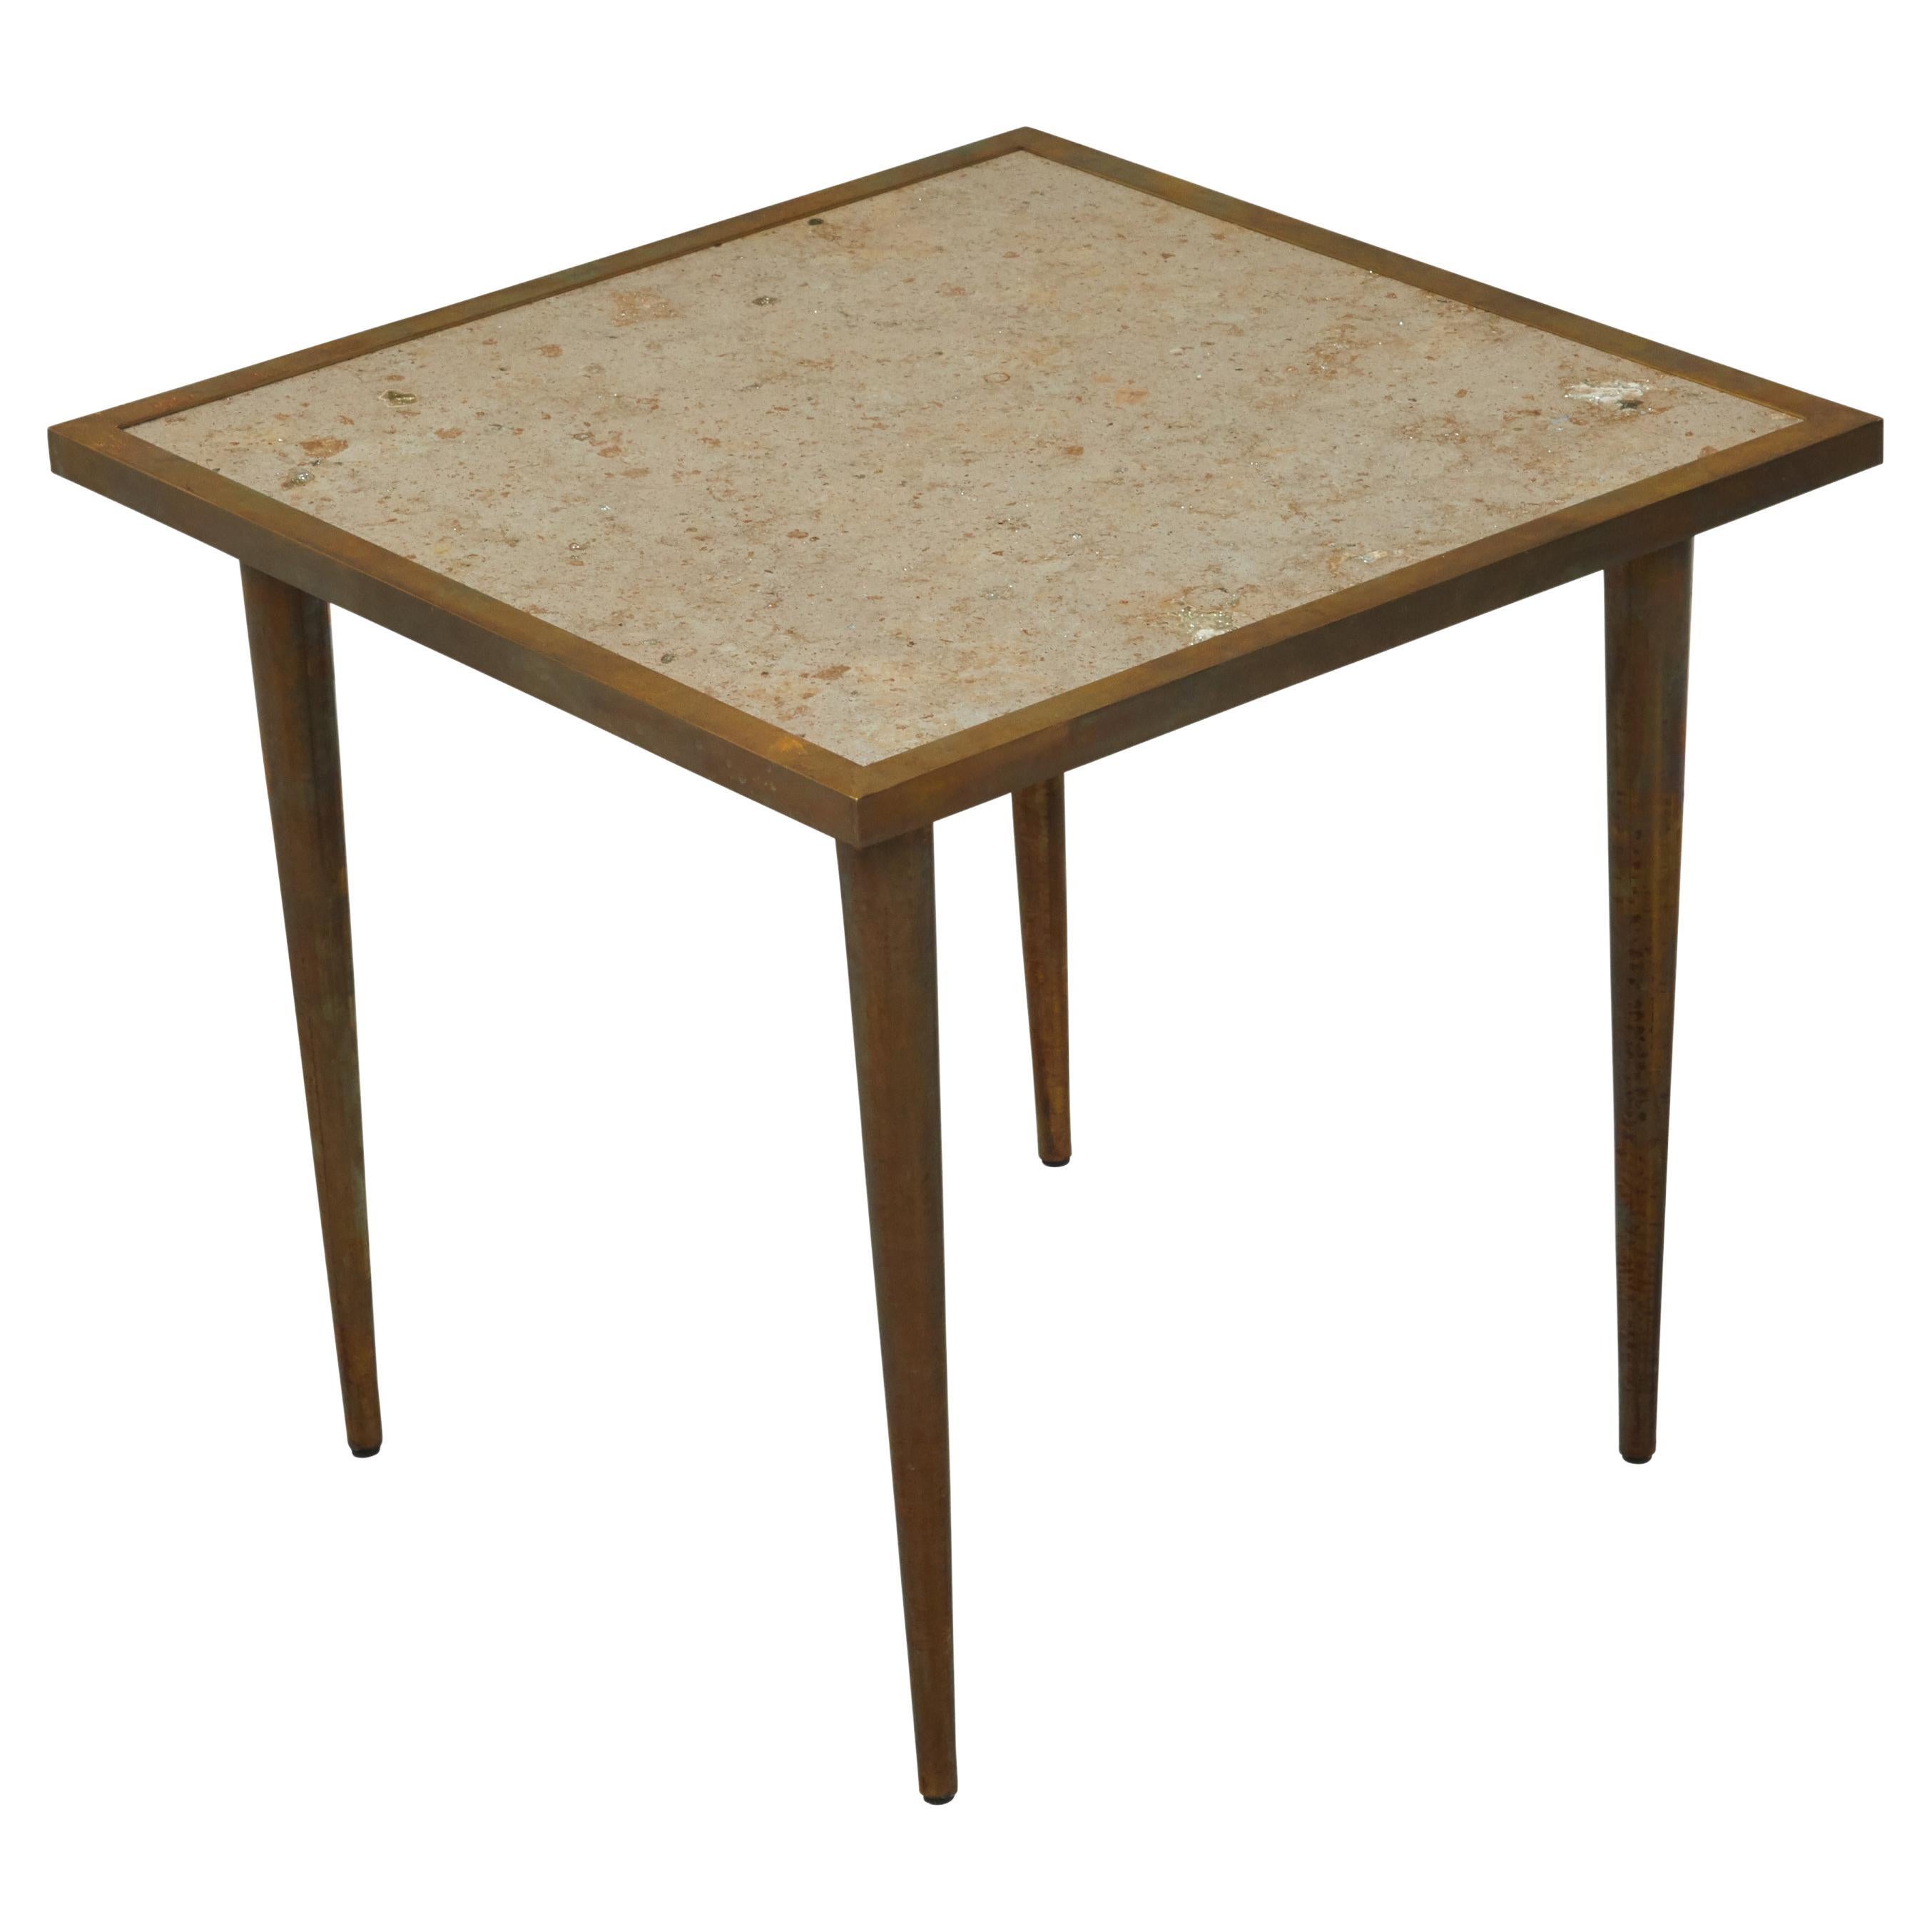 Italian Midcentury Brass Coffee Table with Marble Top and Tapered Legs For Sale